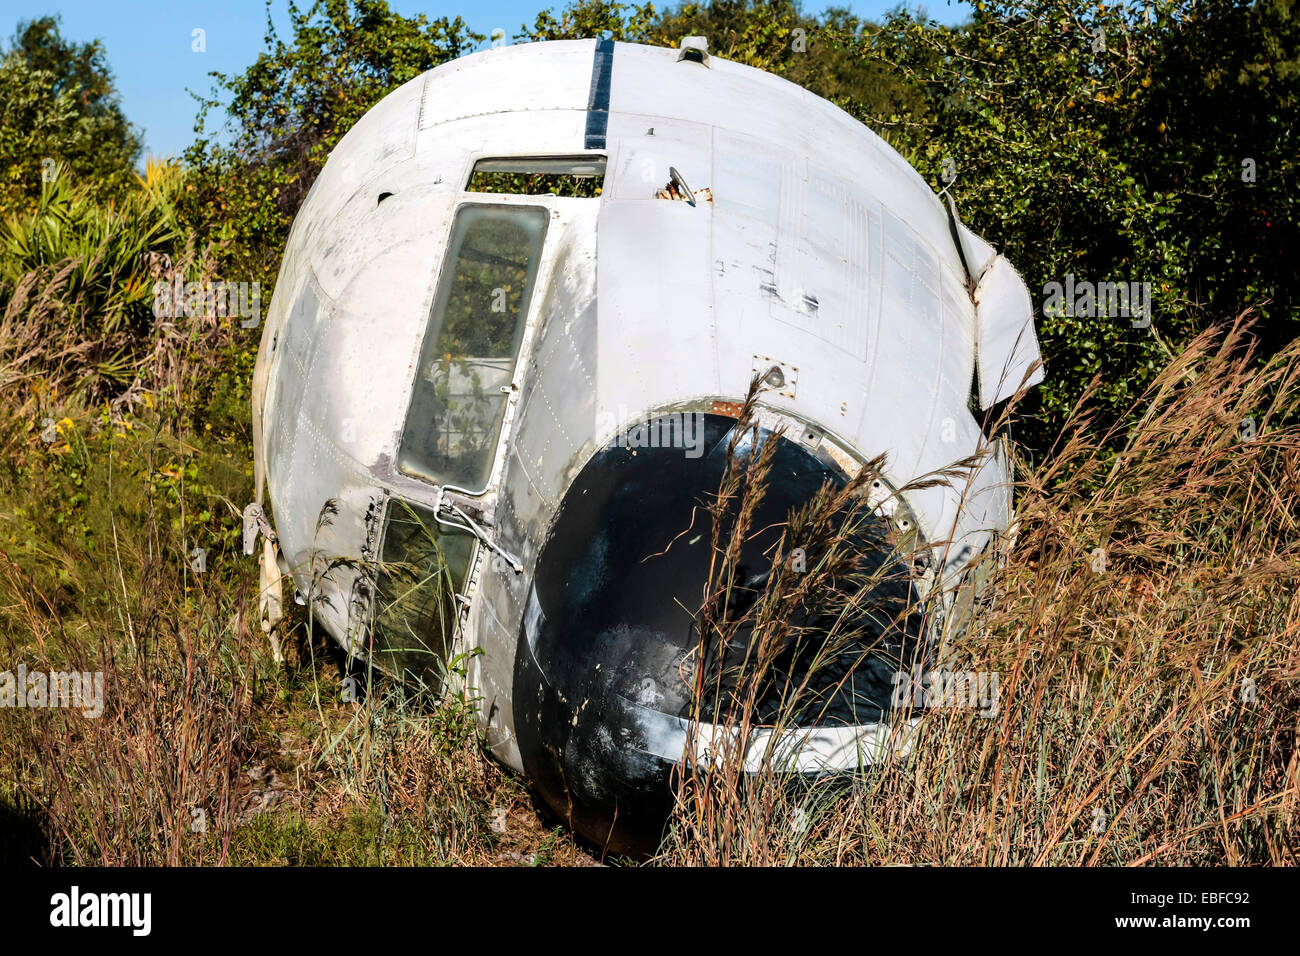 A discarded cockpit section of a Douglas DC-3 at an aviation junkyard in Florida Stock Photo